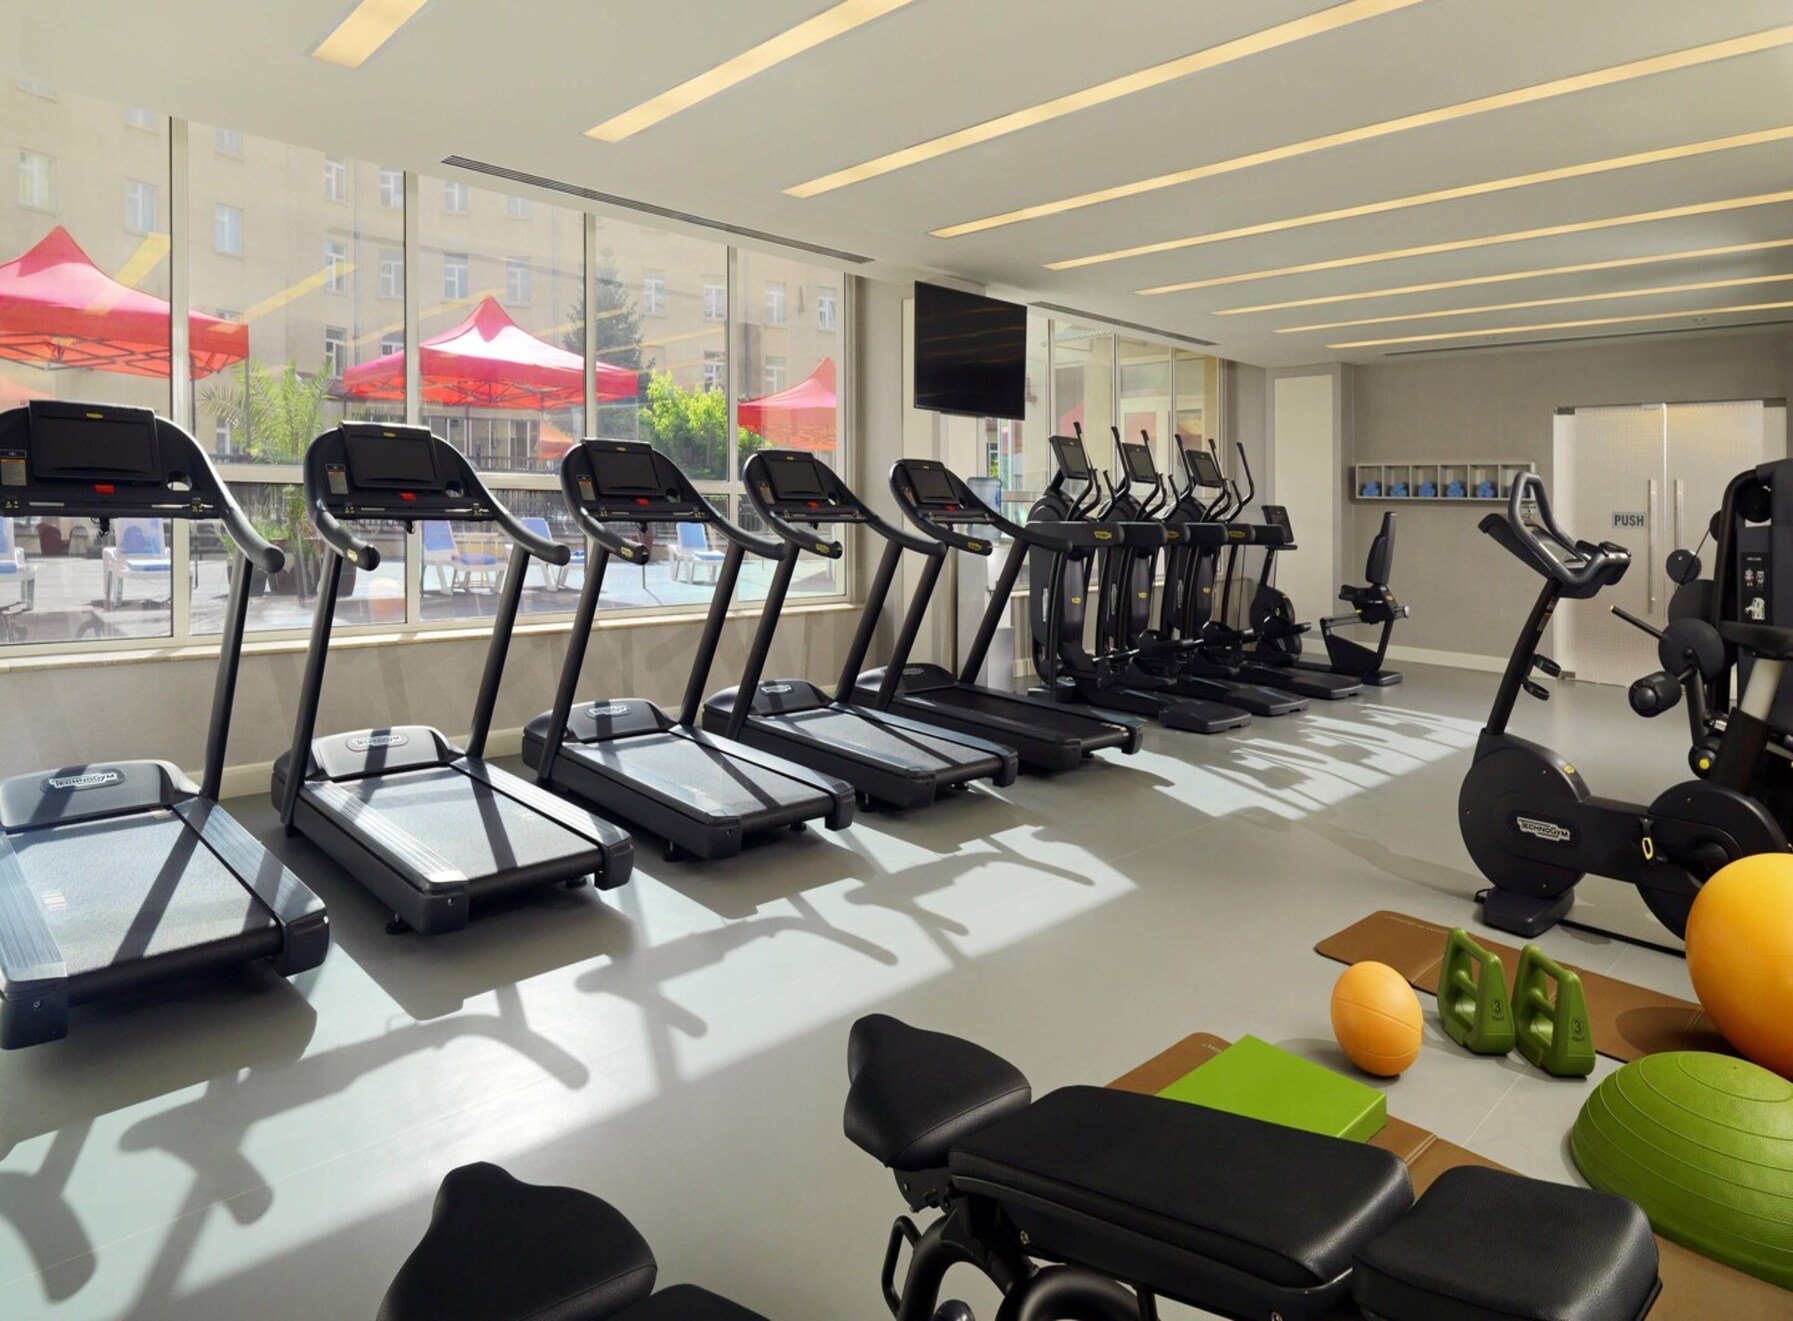 Fitness and spa center “Courtyard by Marriott”